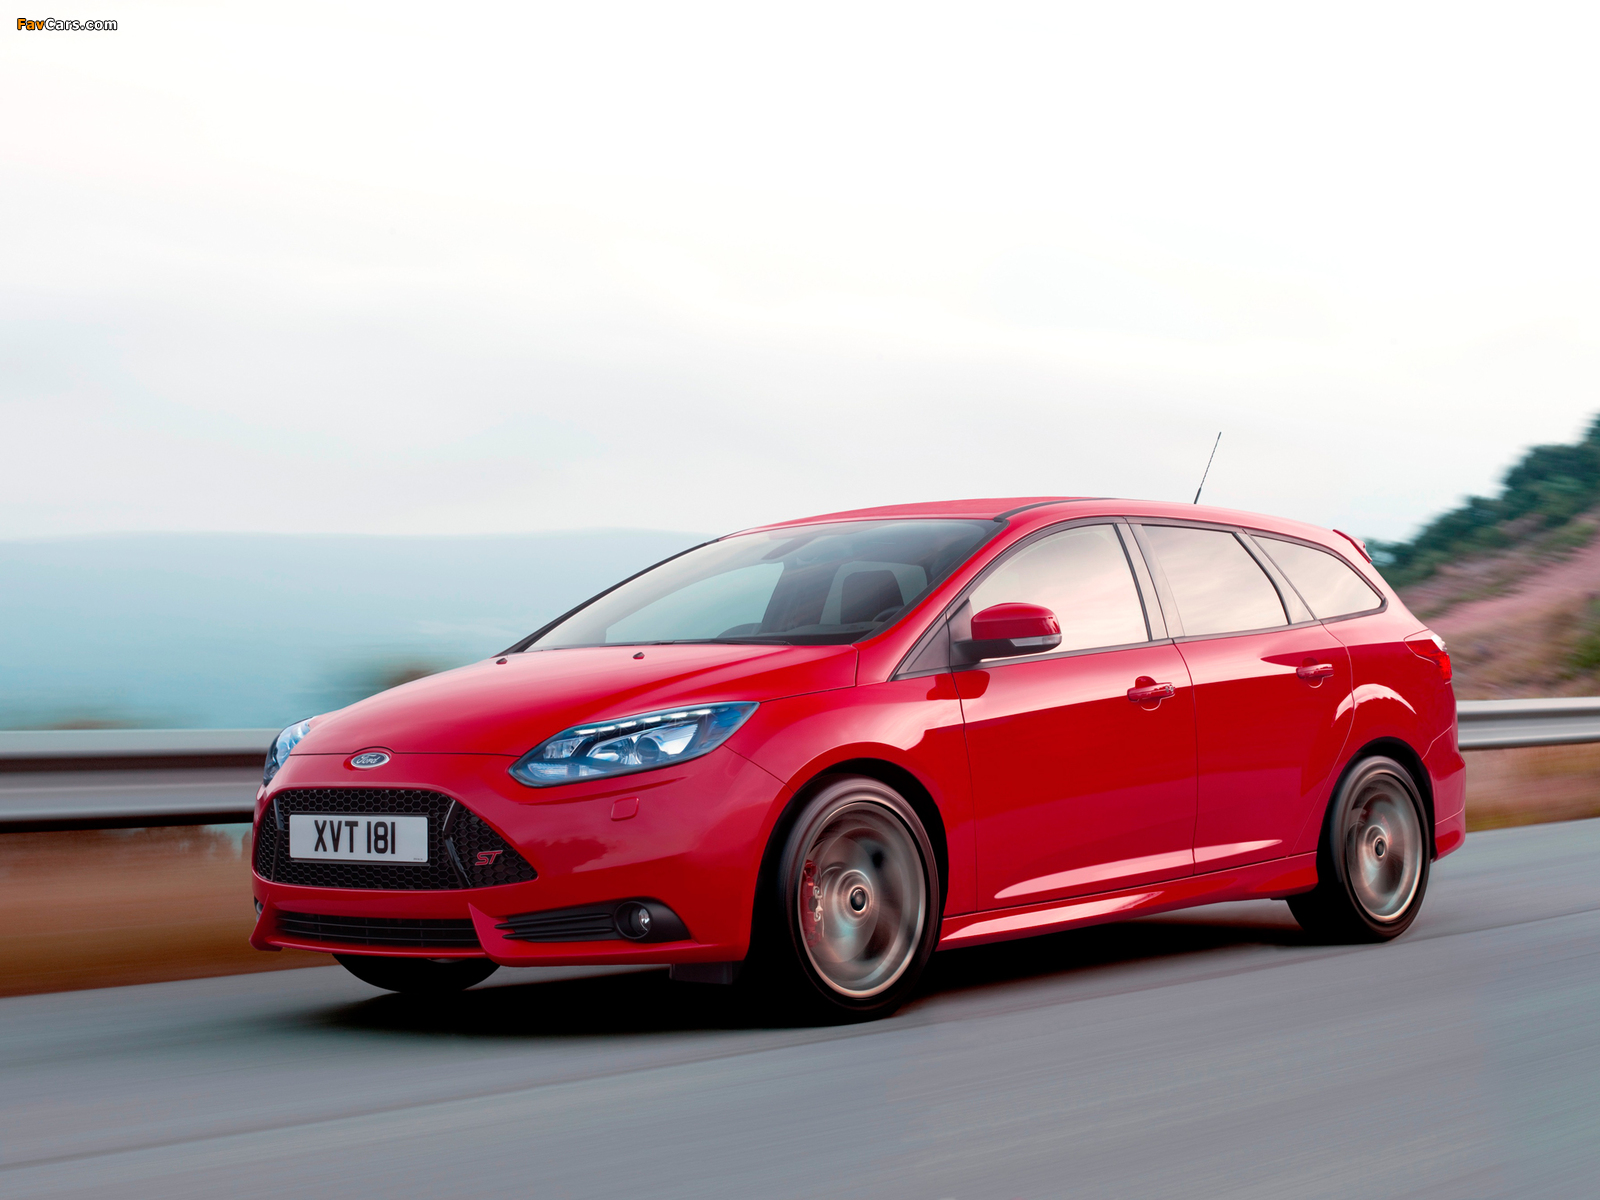 Ford Focus ST Wagon 2012 pictures (1600 x 1200)